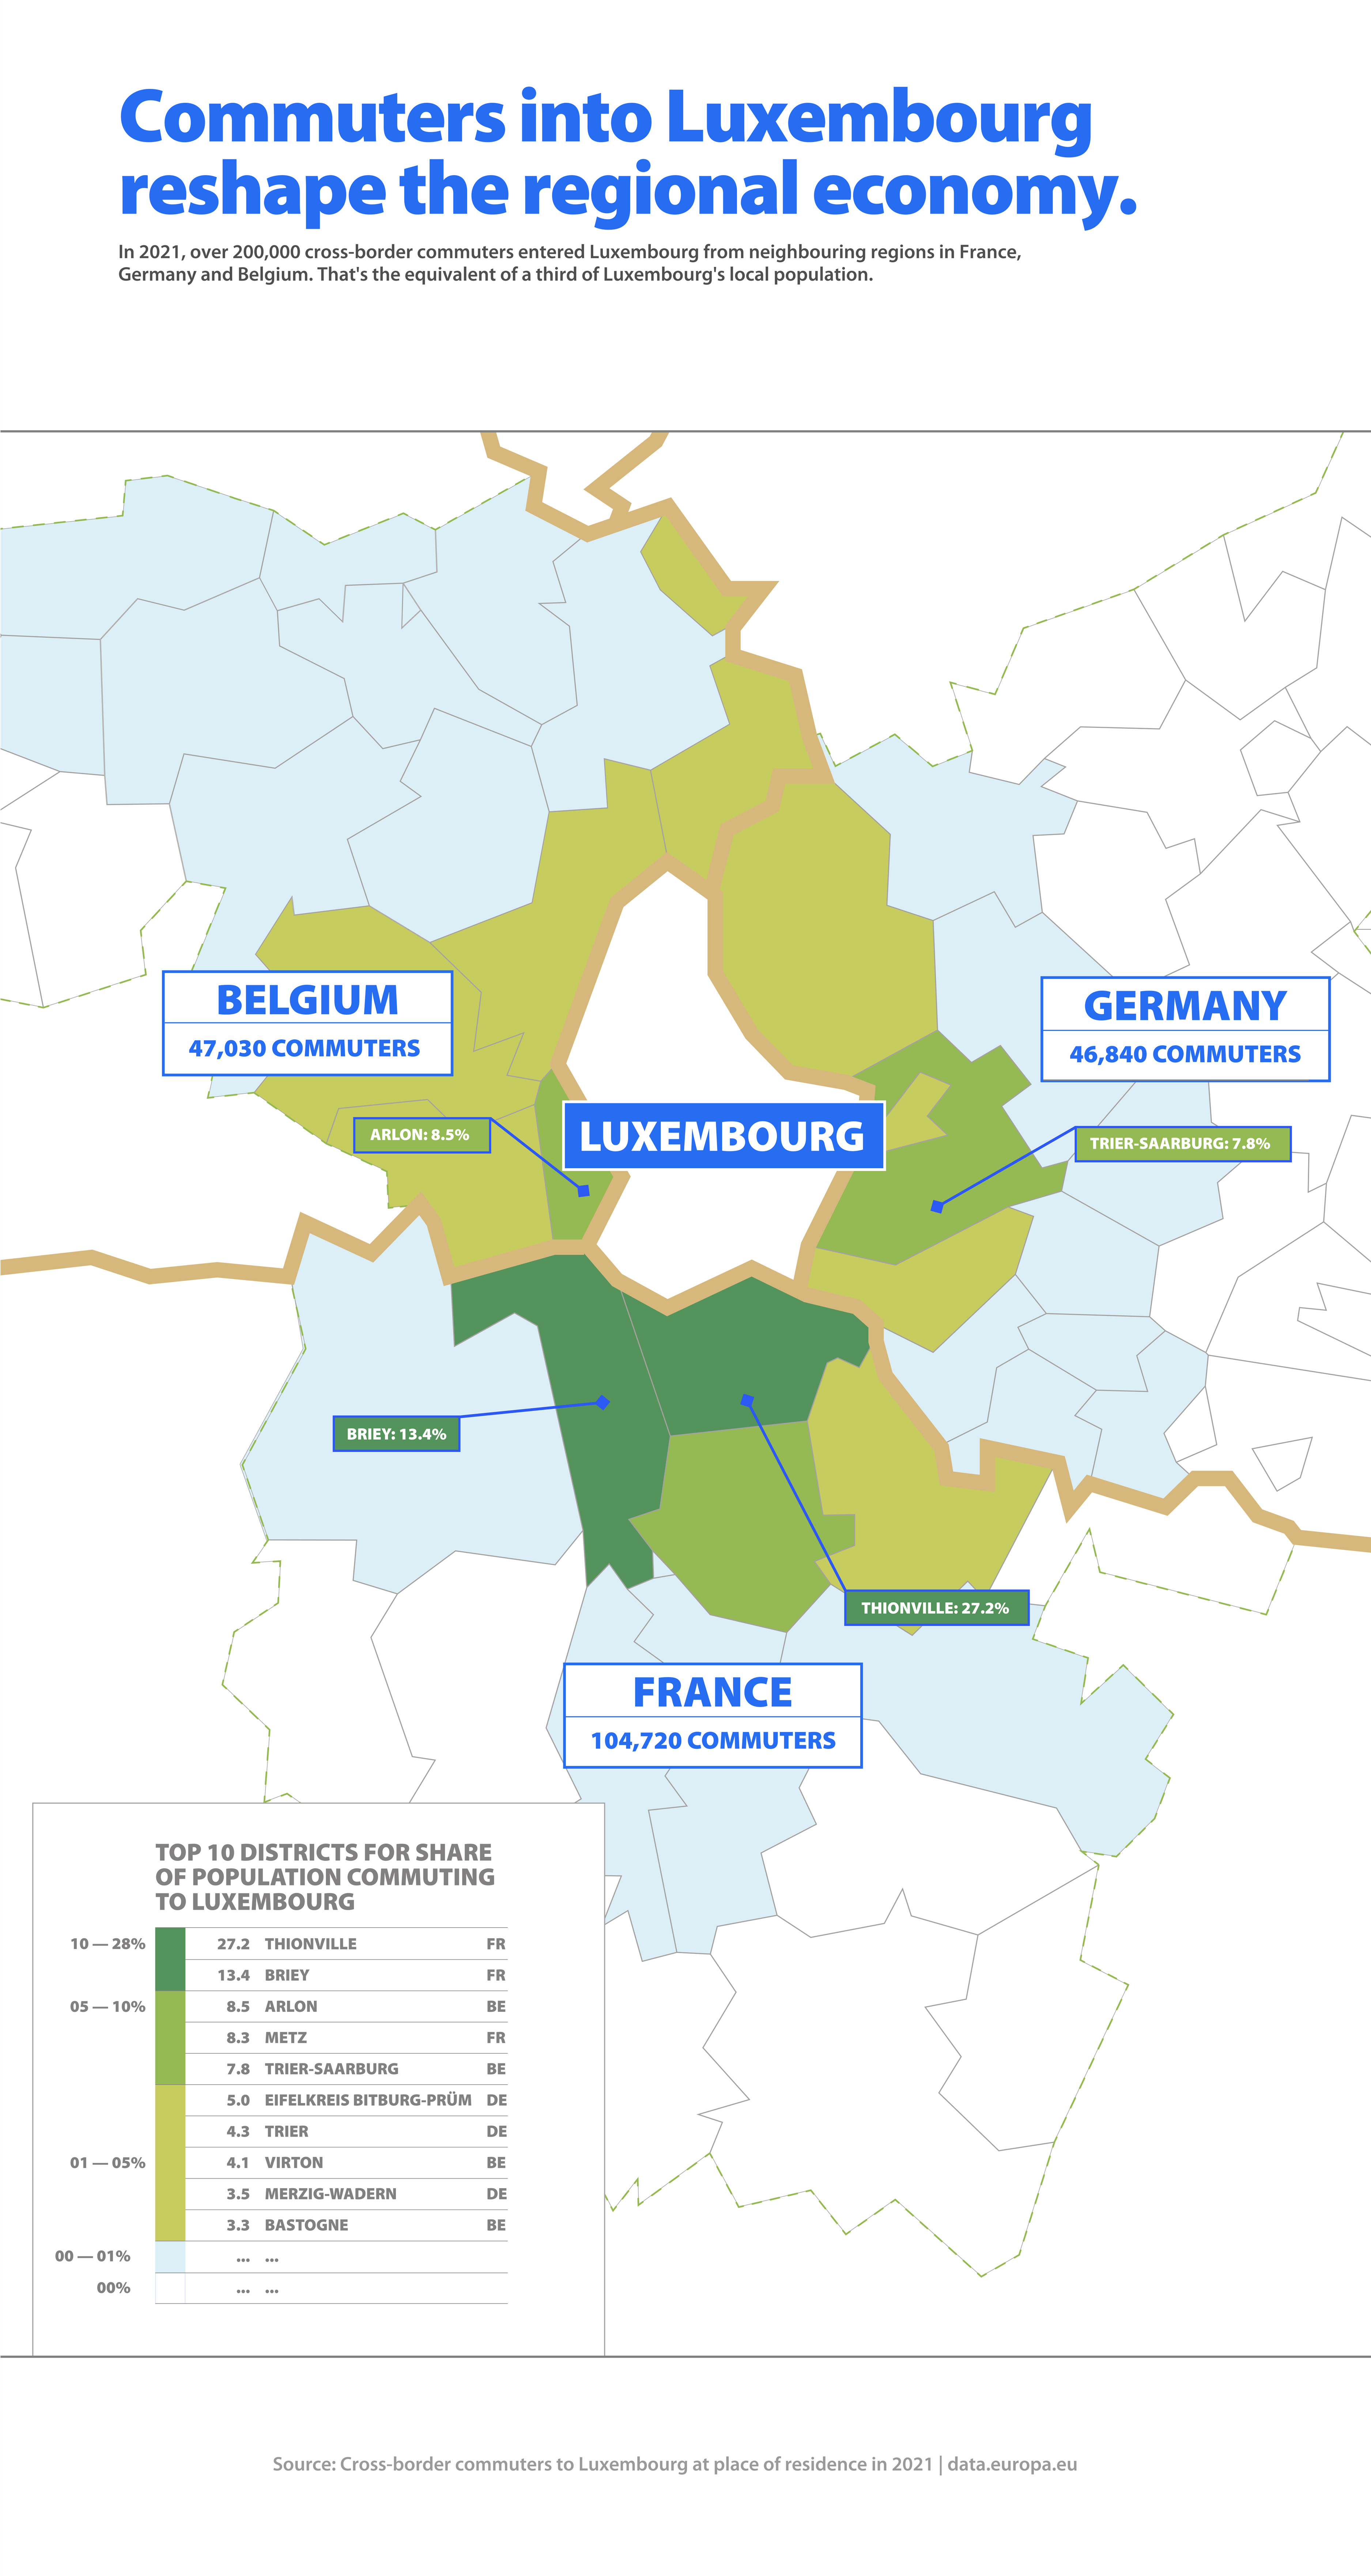 Cross-border commuters from Belgium, Germany and France to Luxembourg from bordering regions in 2021